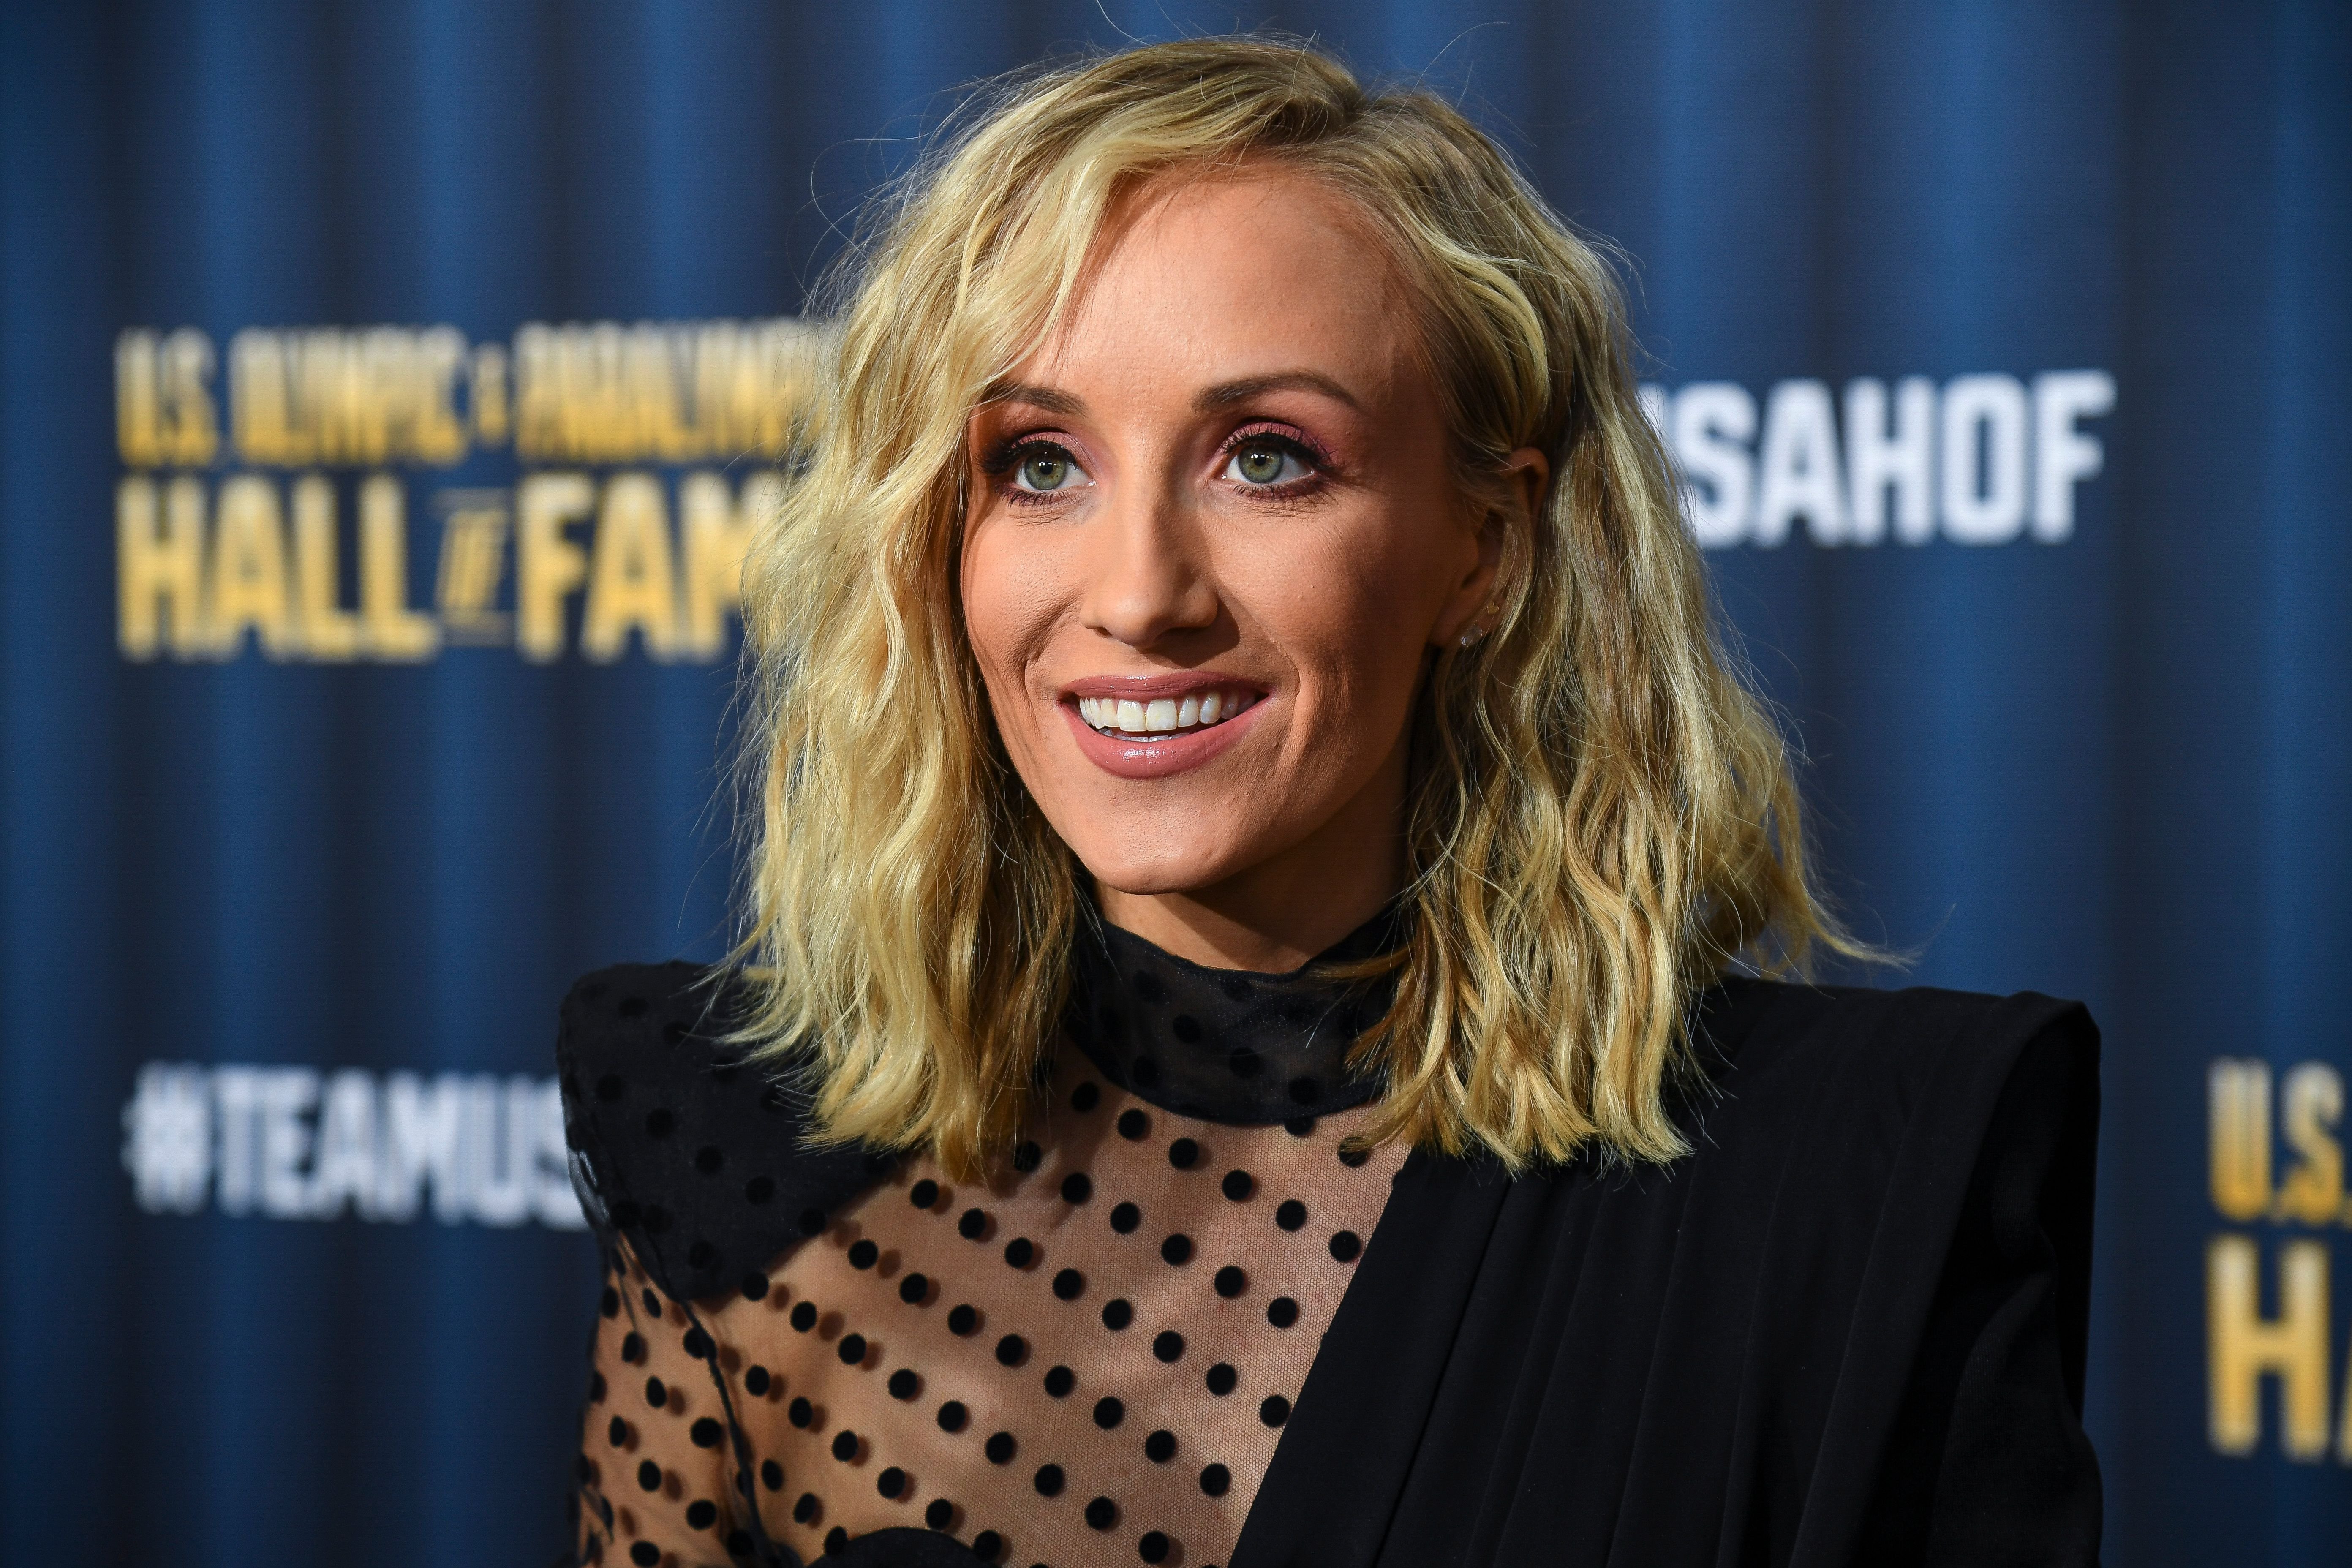 Nastia Liukin talked to the media on the red carpet before the U.S. Olympic Hall of Fame Class of 2019 Induction Ceremony on November 1, 2019 | Photo: Getty Images